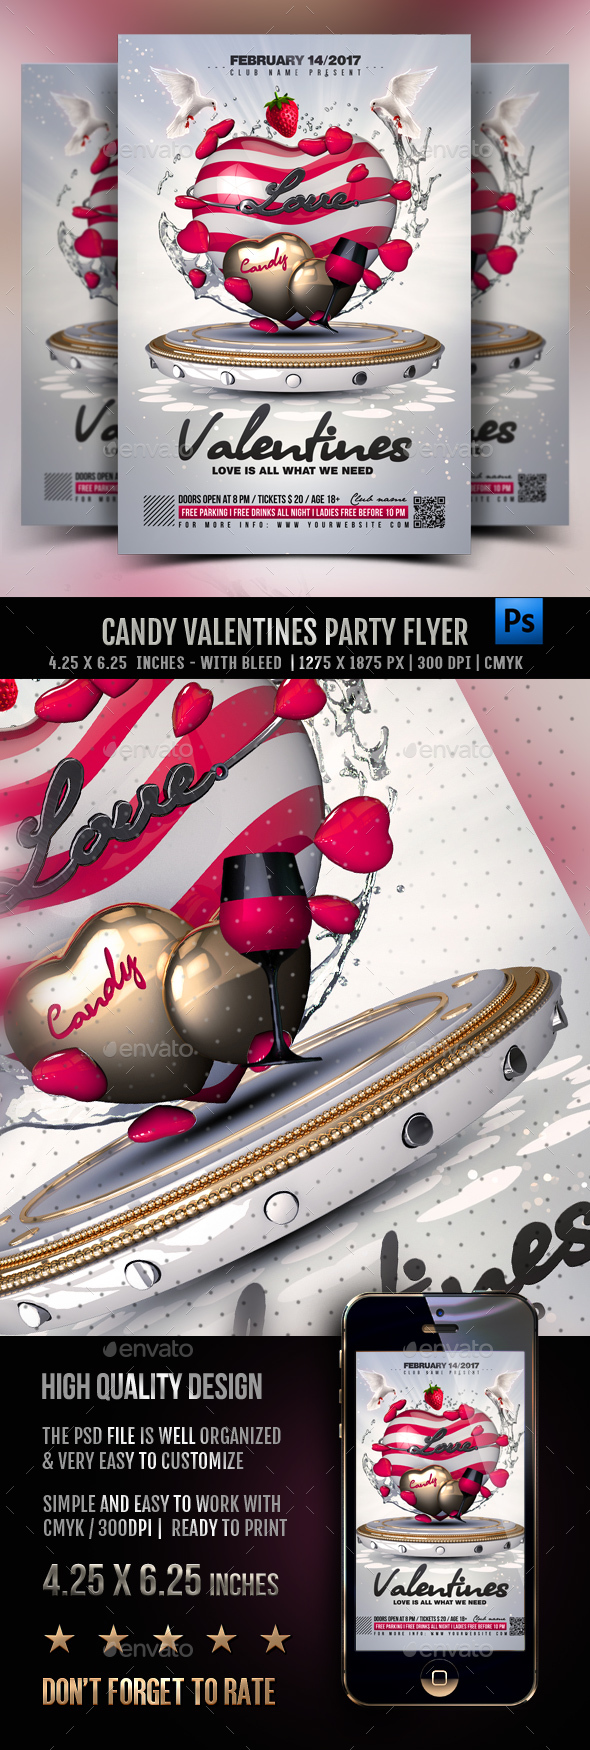 Candy Valentines Party Flyer